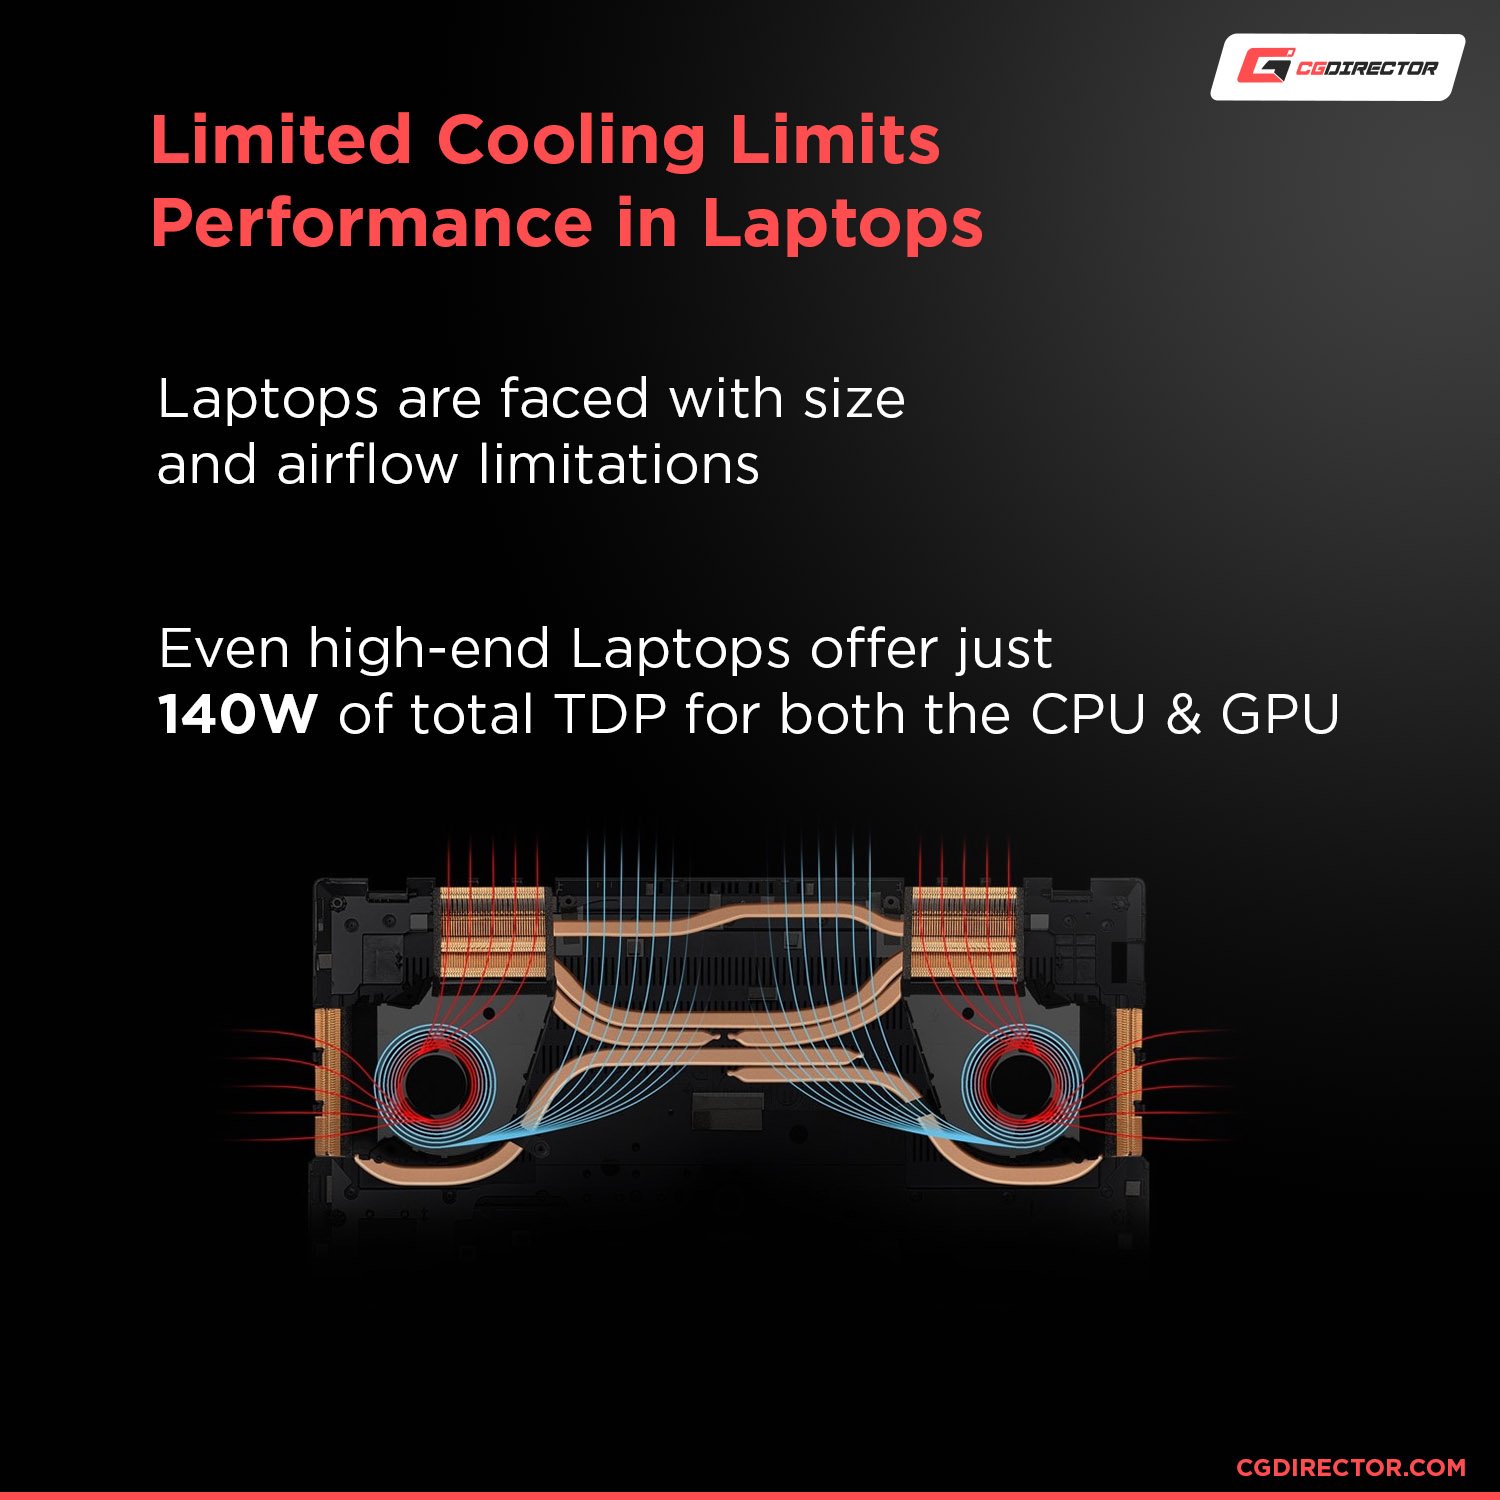 Limited Cooling in Laptops